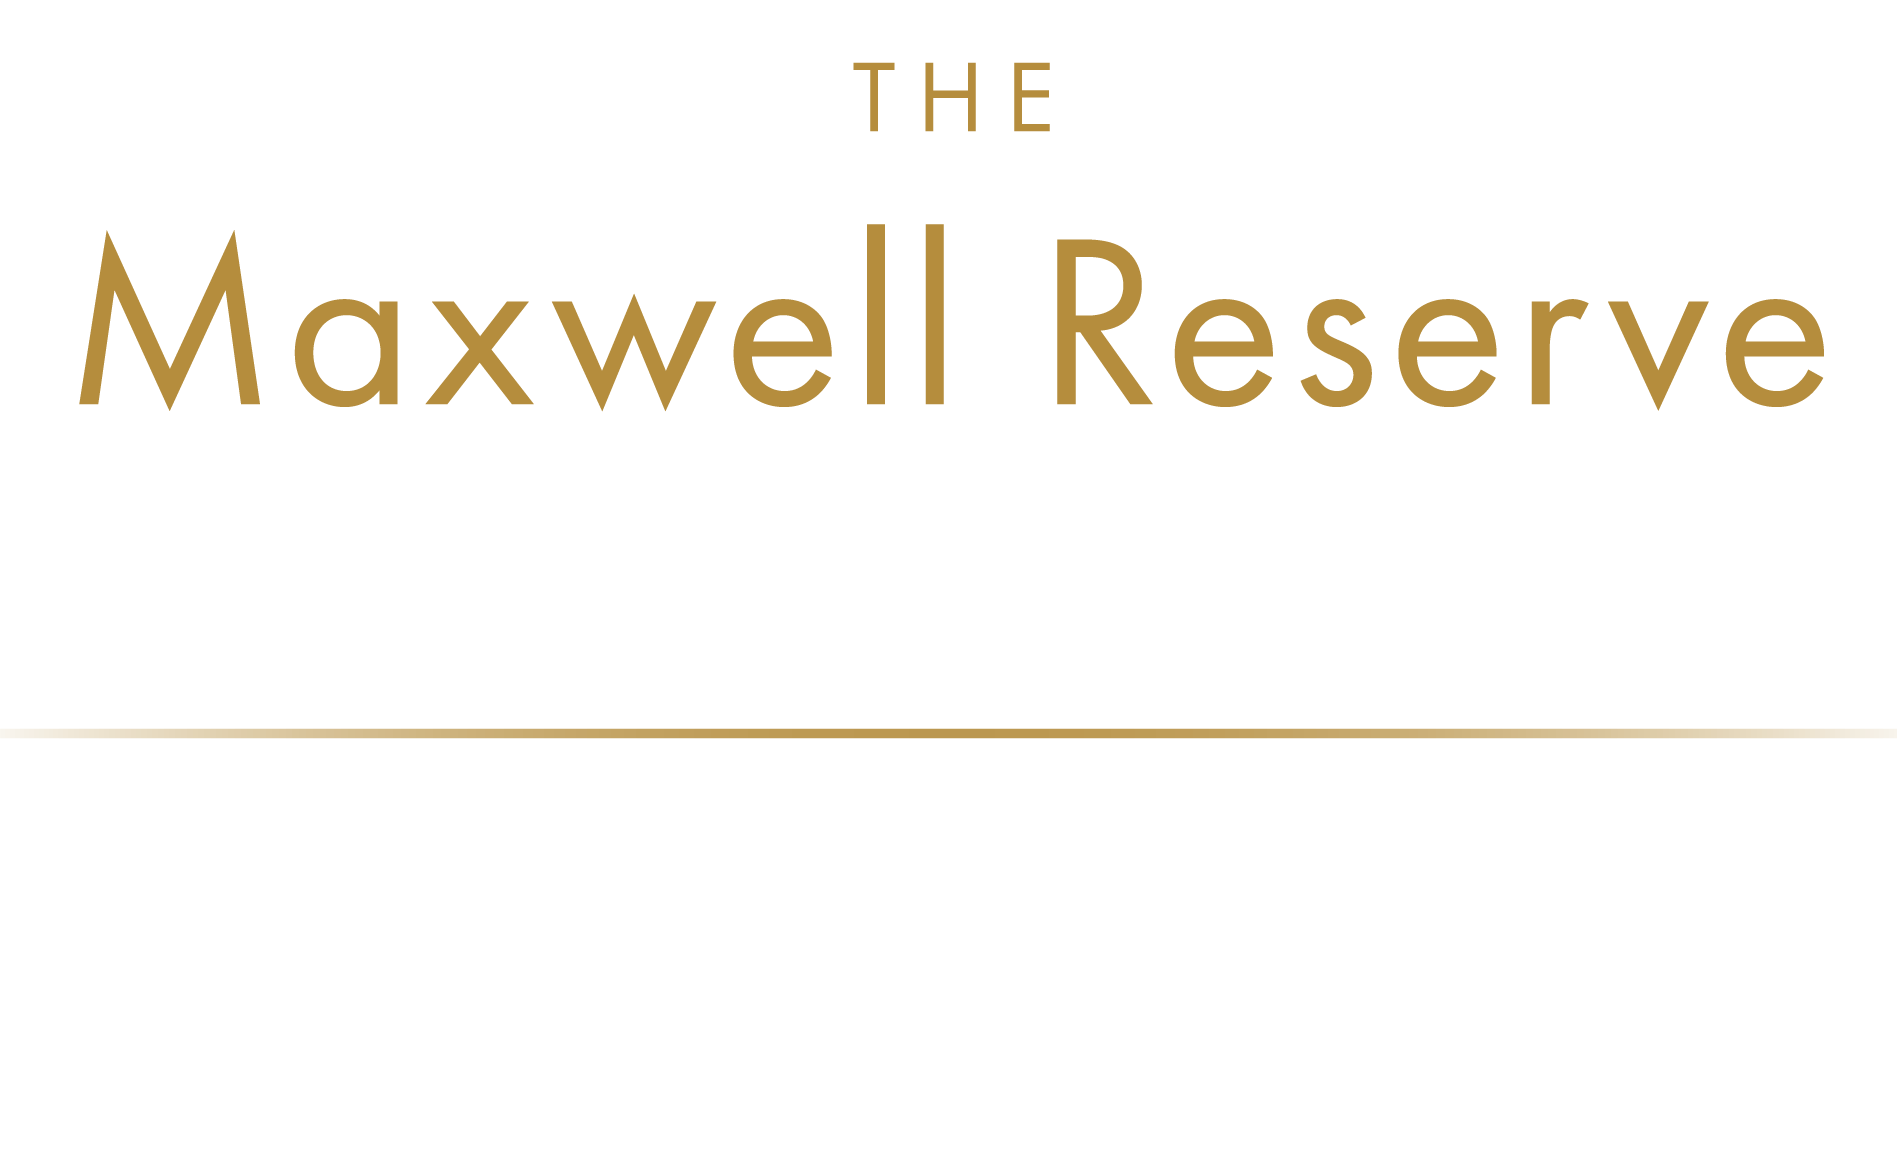 The Maxwell Reserve Hotel